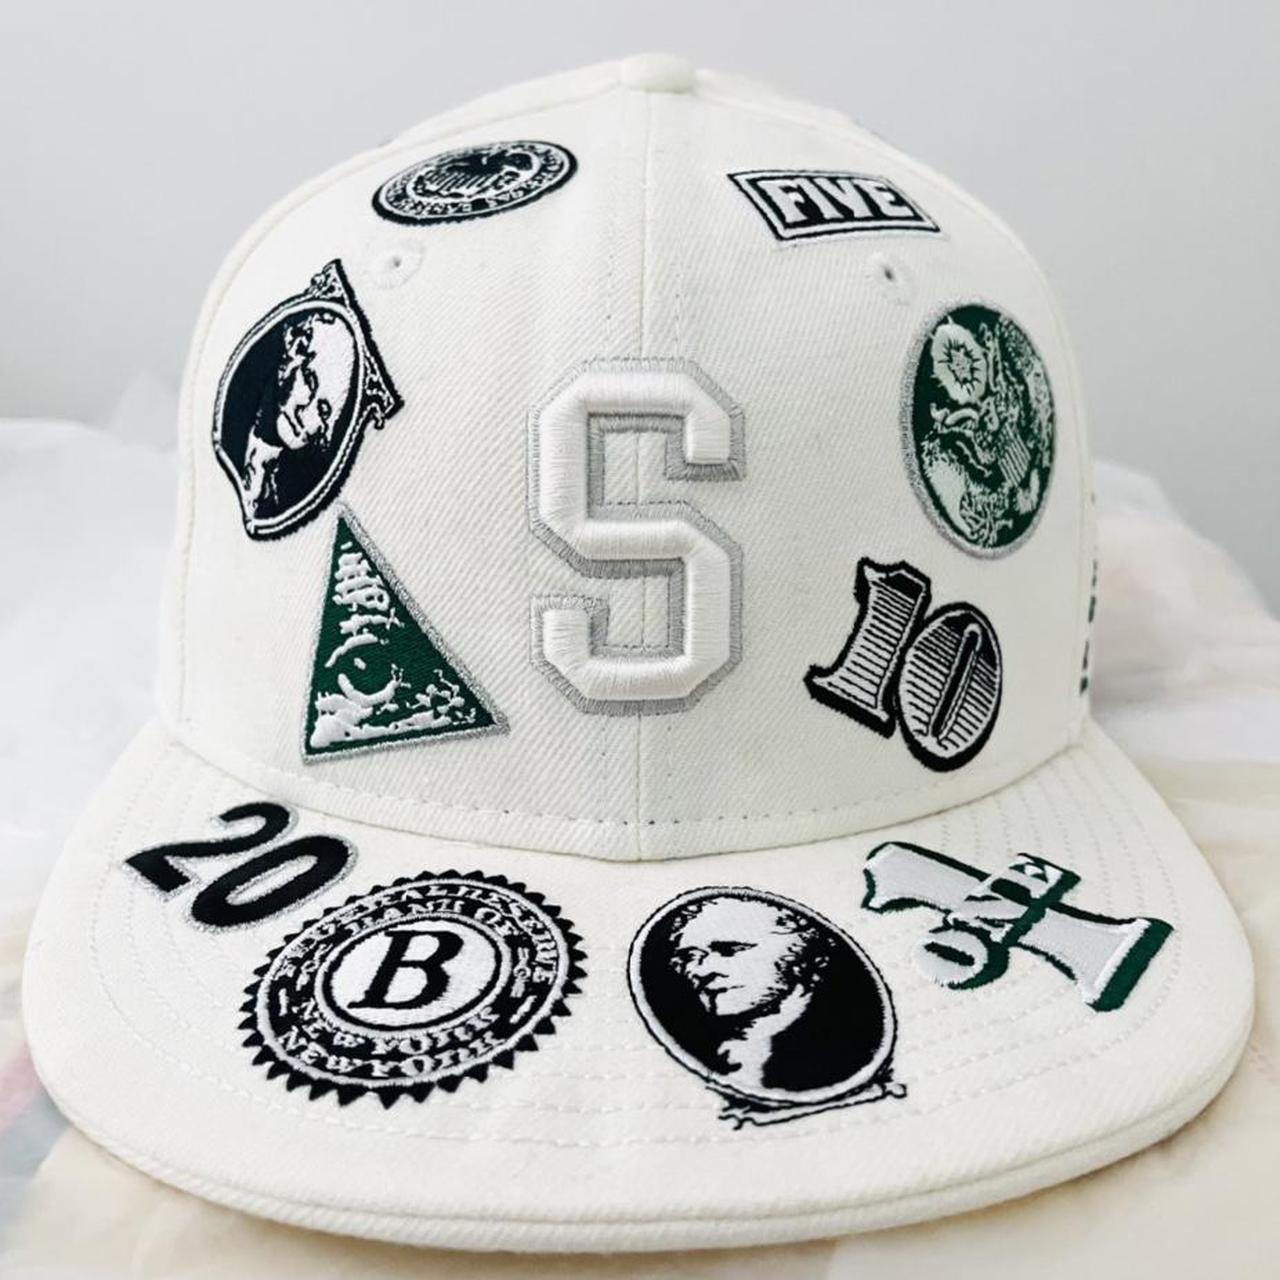 Supreme New York x New Era 59fifty Fitted Cap. Size...